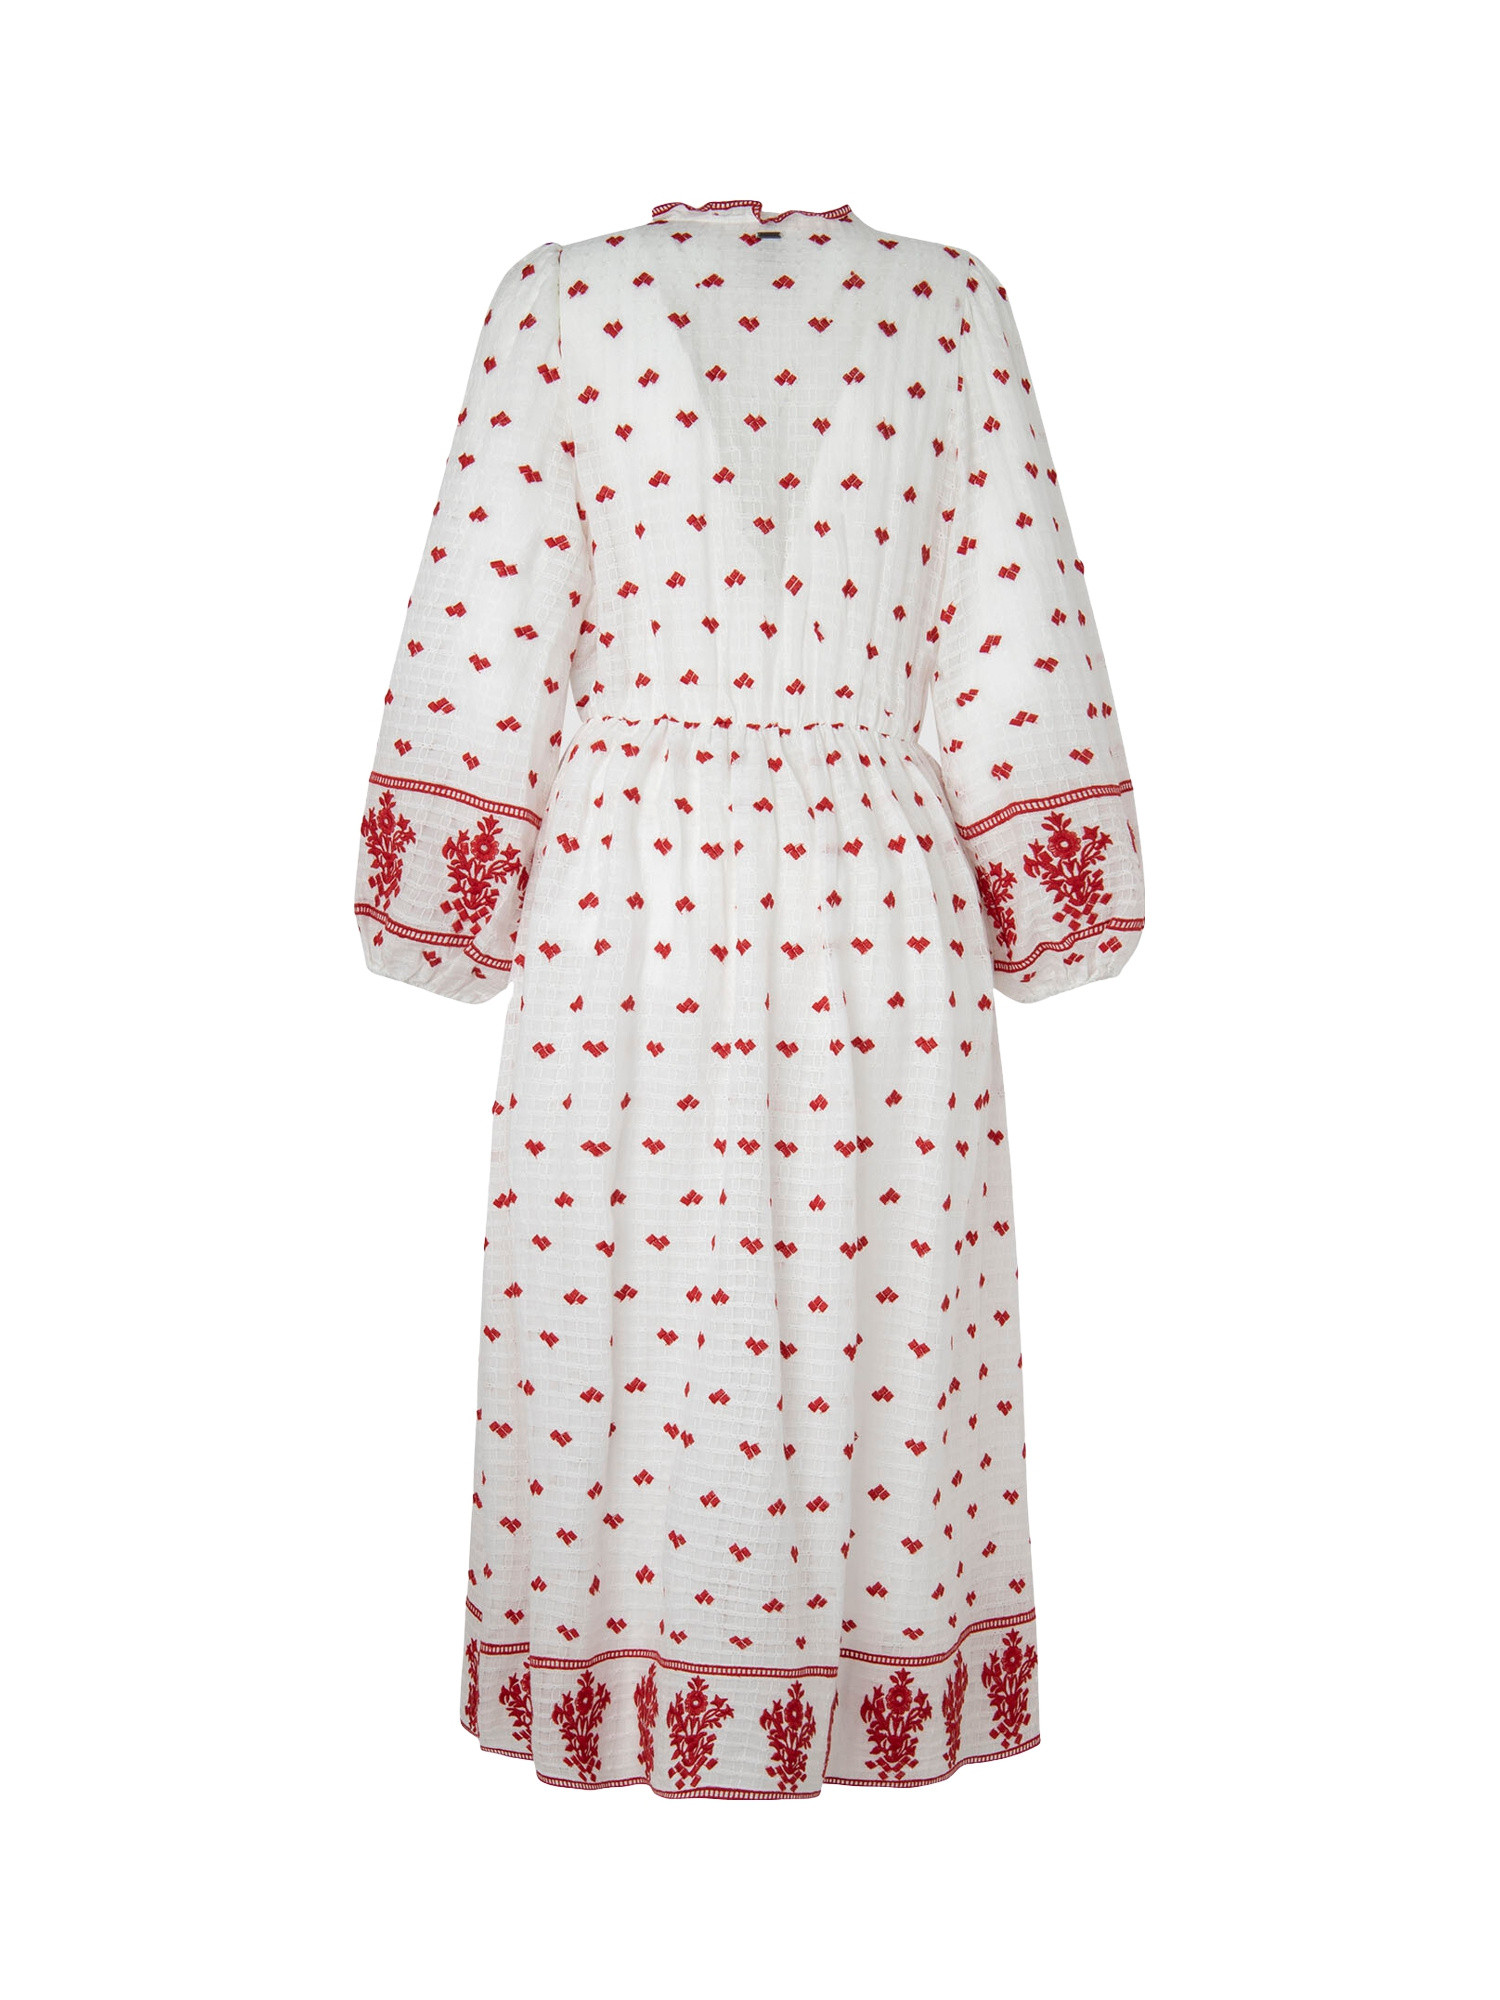 Pepe Jeans - Long patterned dress, White, large image number 1